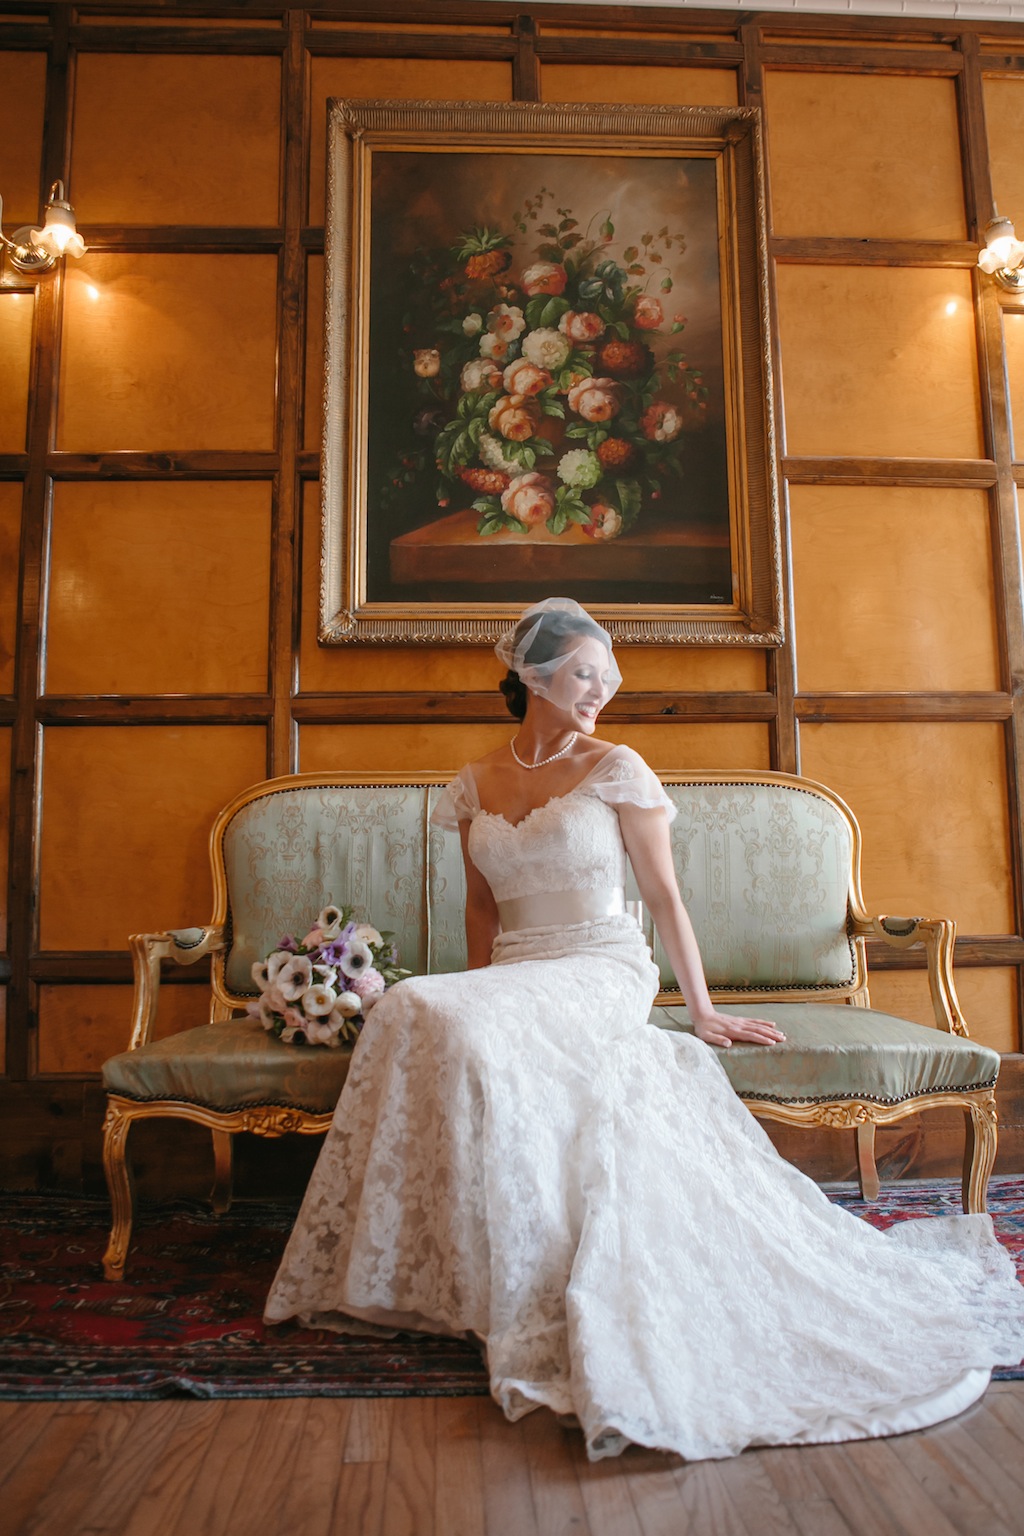 Vintage Bride with Birdcage Veil - Tampa Wedding Photography Carrie Wildes Photography